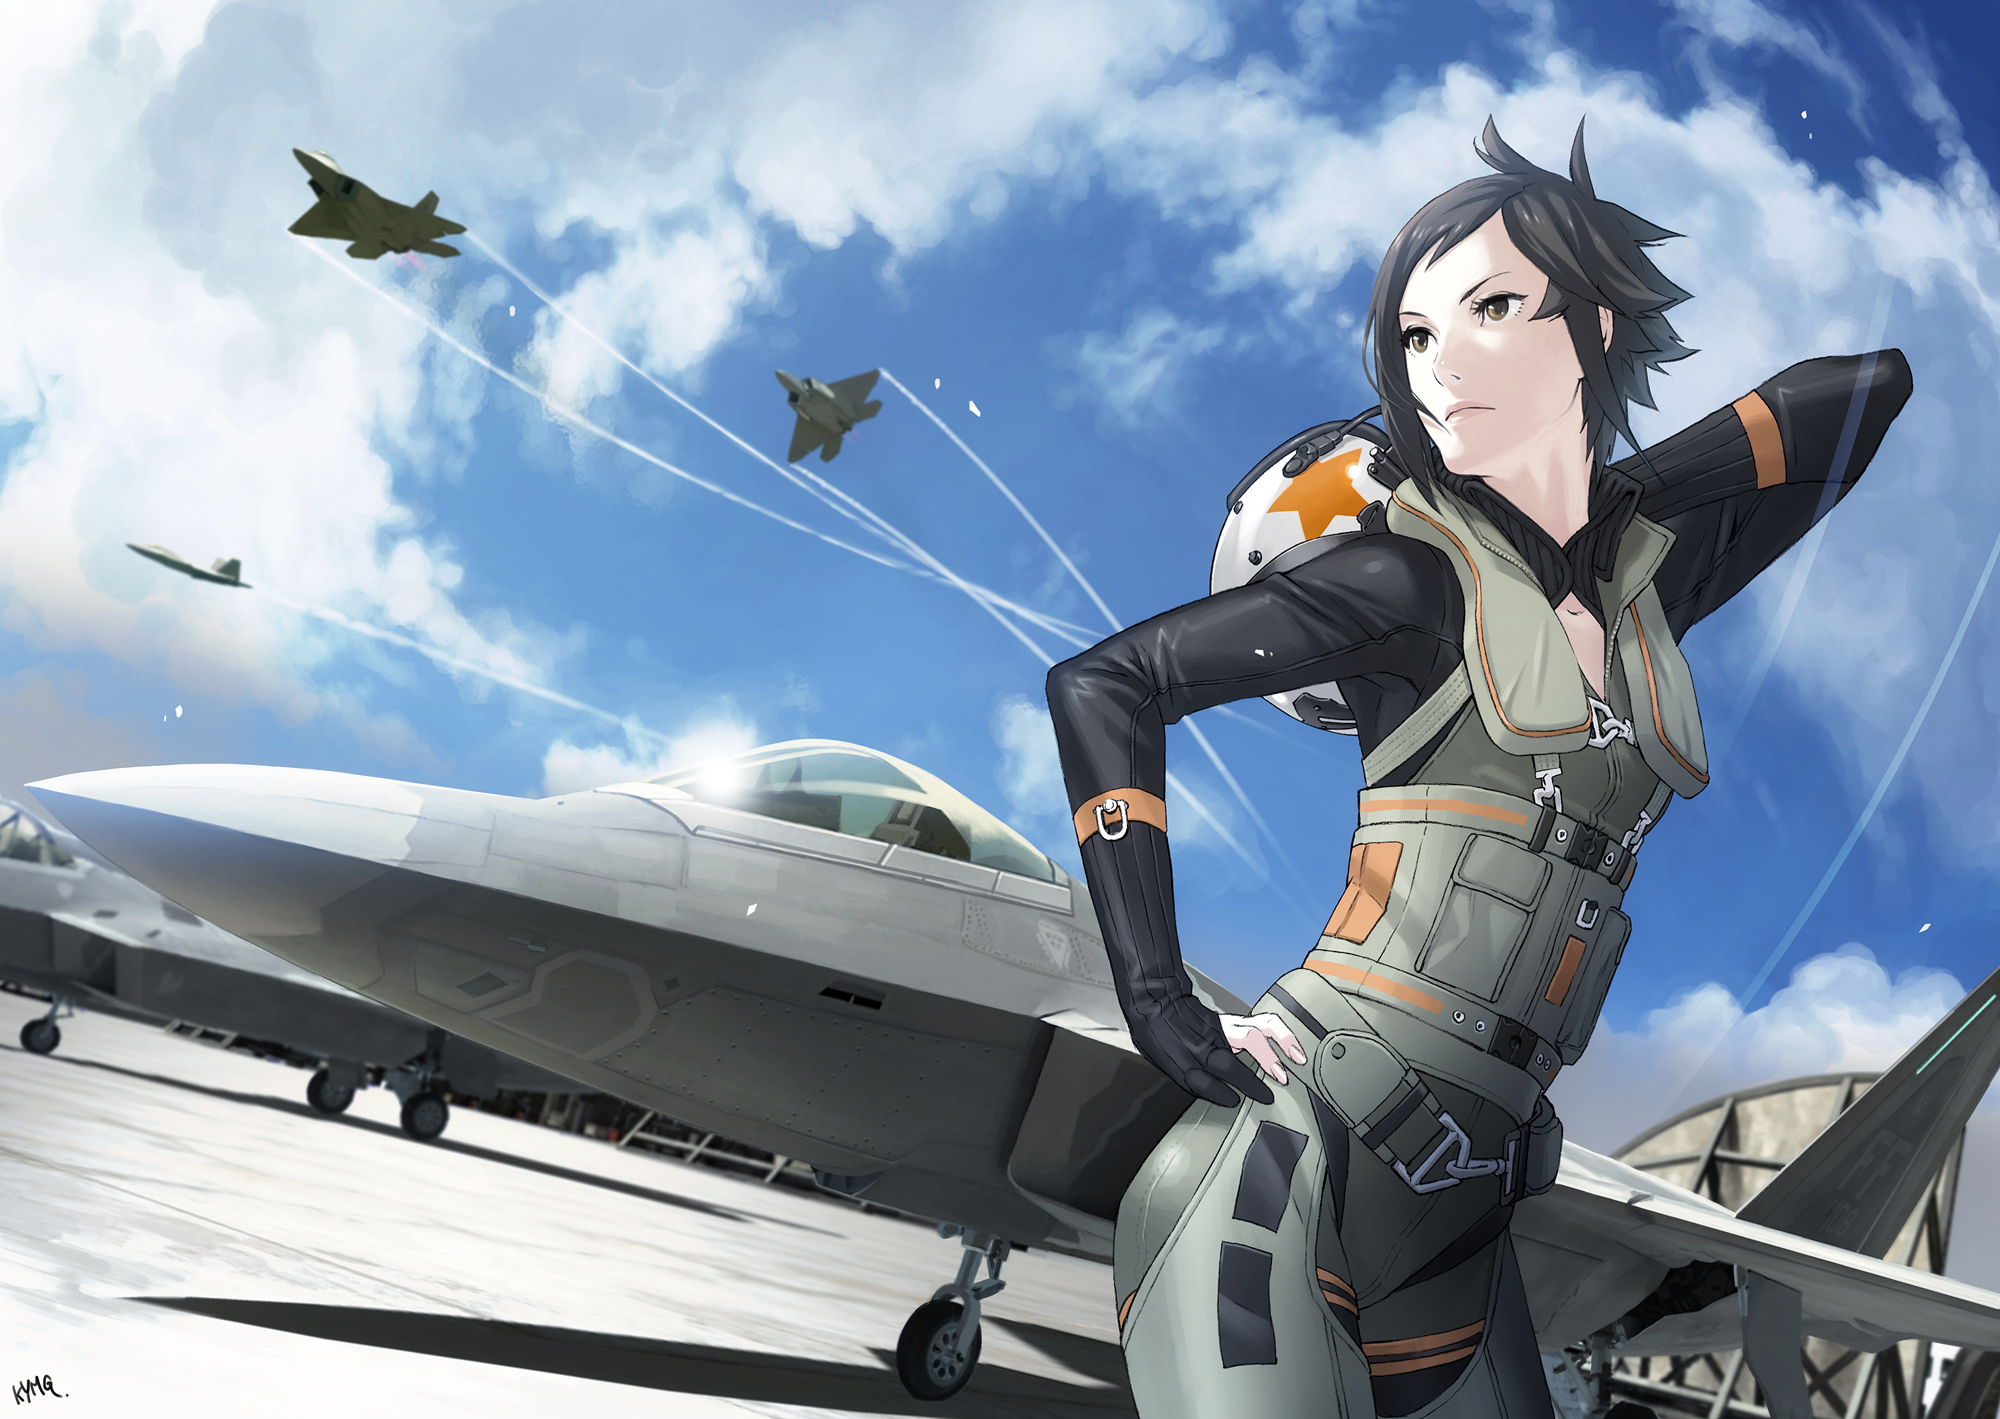 ace, Combat, Game, Jet, Airplane, Aircraft, Fighter, Plane, Military, Girl Wallpaper